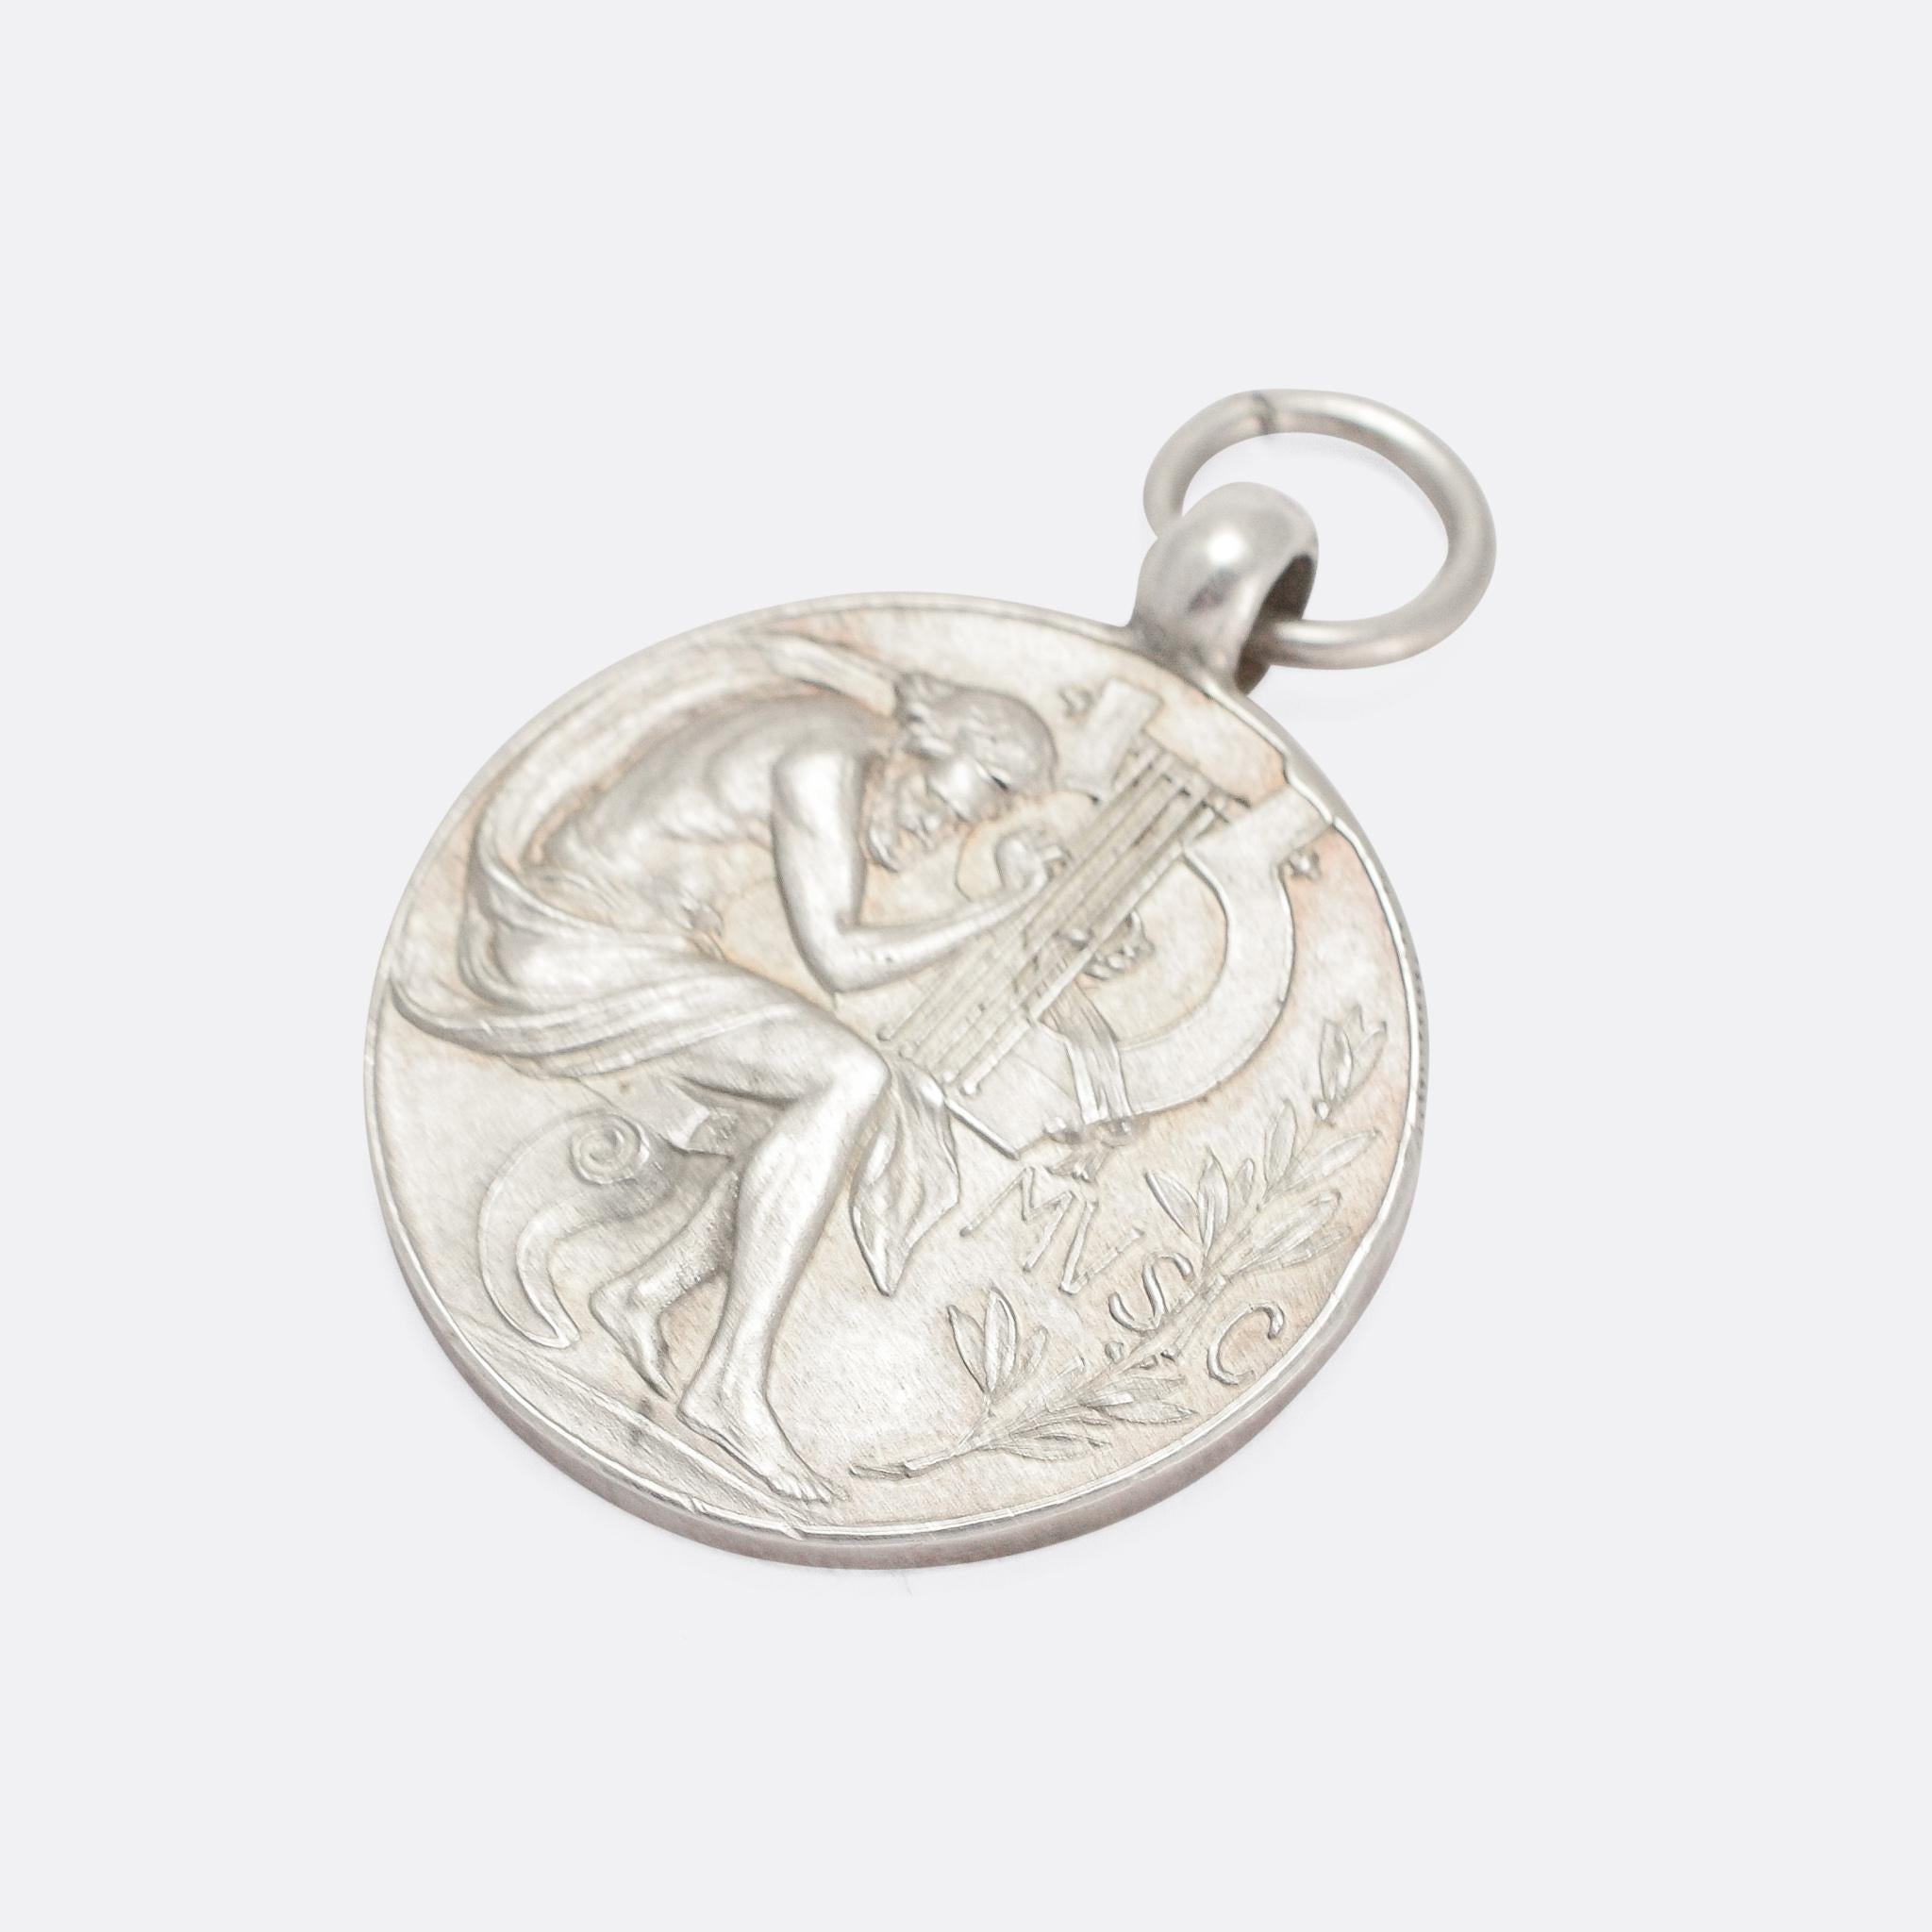 A fine antique medallion pendant featuring Orpheus playing the lyre, next to the word MUSIC. It's modelled in sterling silver, and dates from the early 20th Century. 

MEASUREMENTS 
3.2 x 2.6cm (not including jump ring)

WEIGHT 
8.9g

MARKS 
English